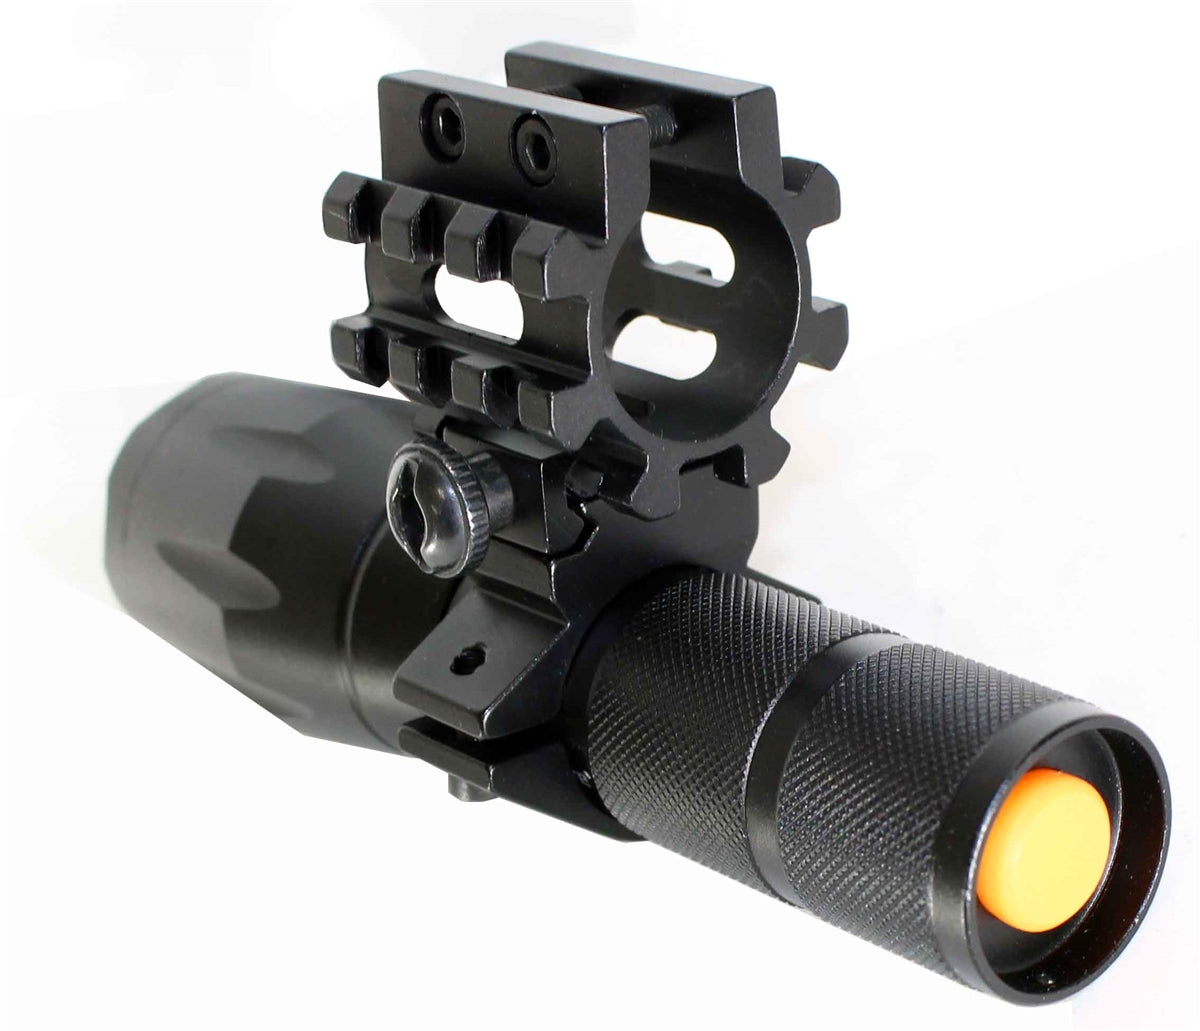 Tactical 1000 Lumen Flashlight With Mount Compatible with 12 Gauge Pumps.